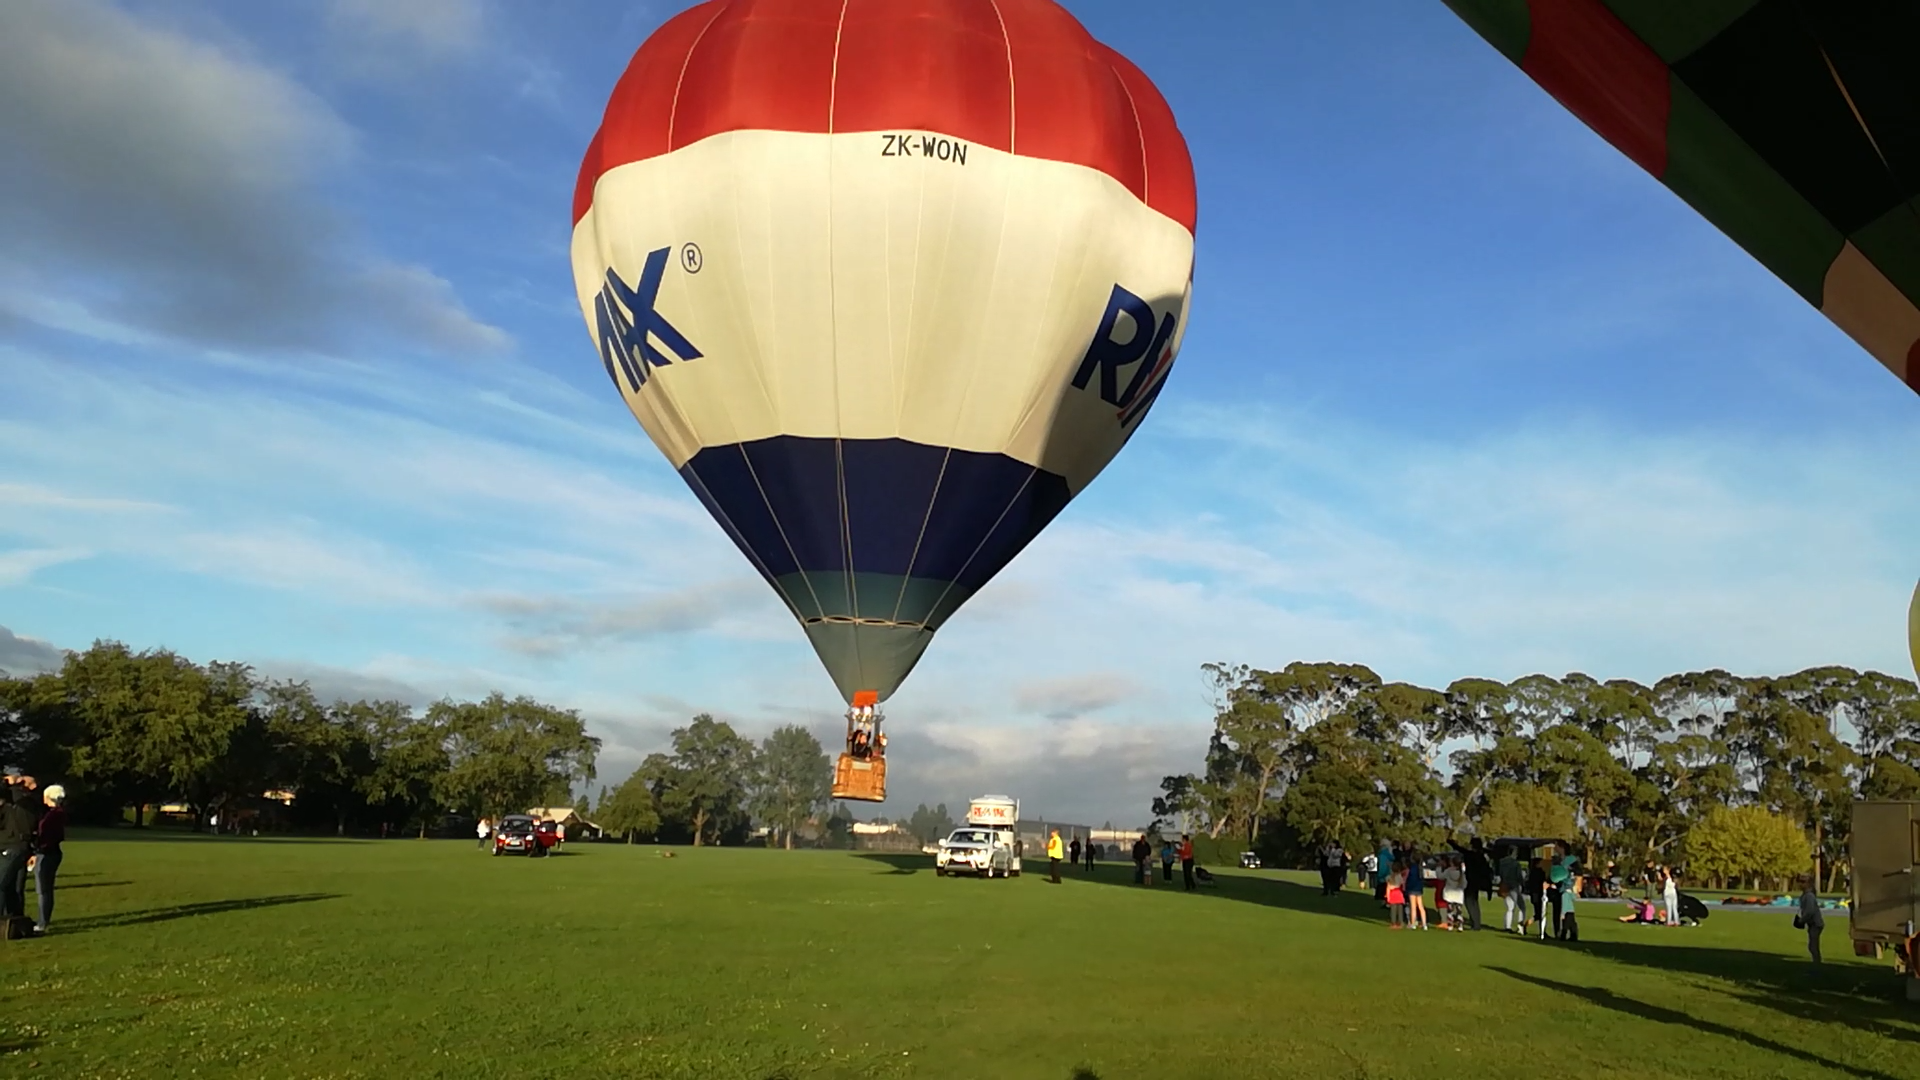 RE/MAX back at Balloons over Waikato. Photo: Emelyn McHardy